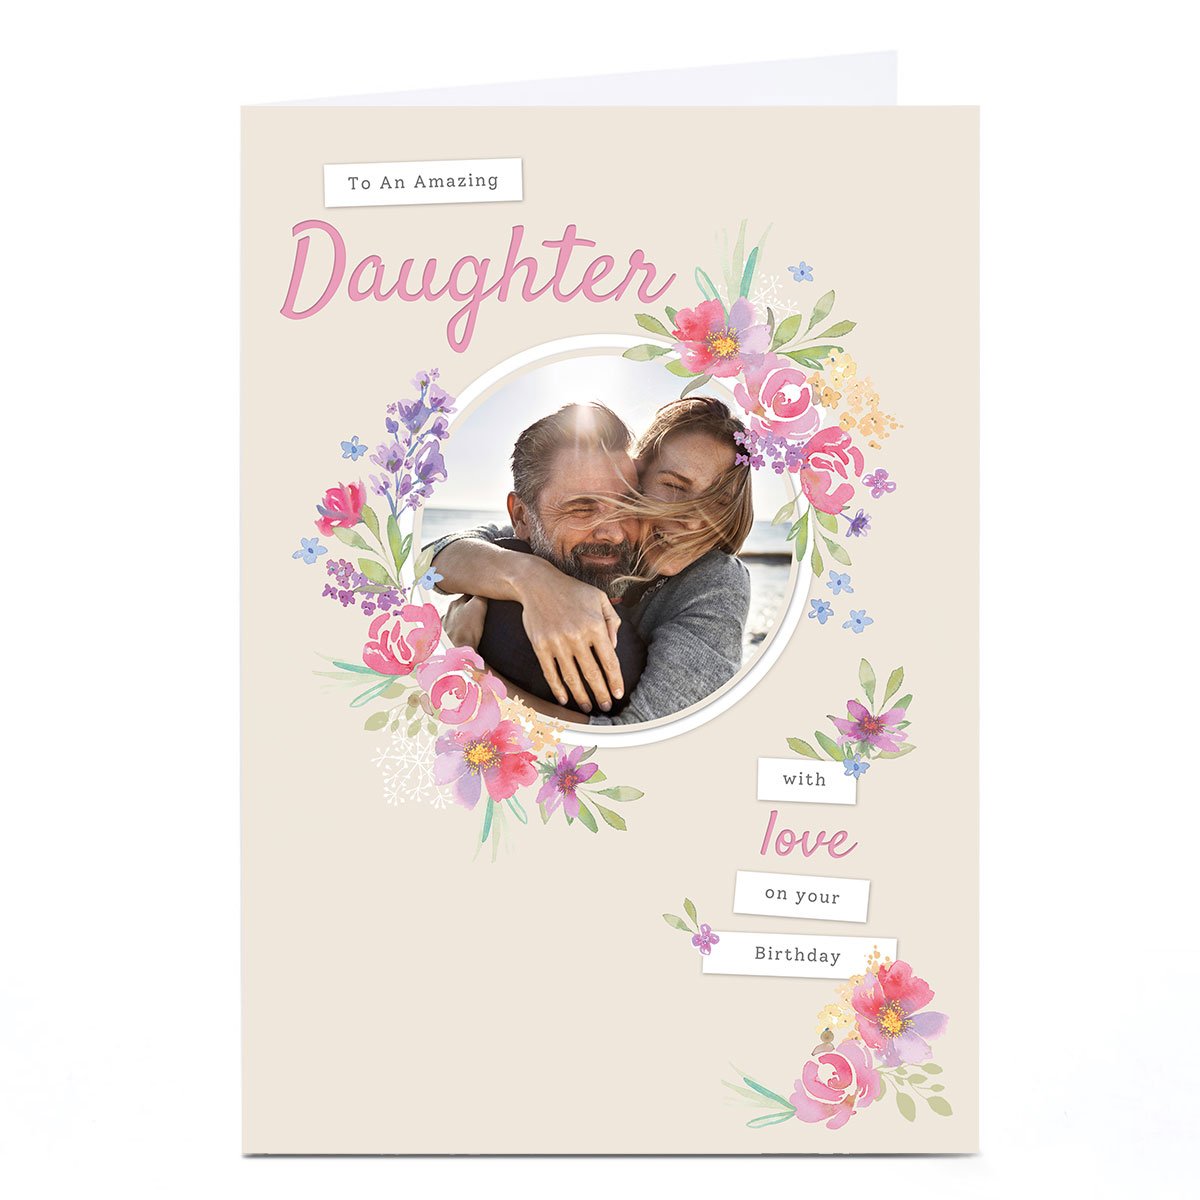 Photo Kerry Spurling Birthday Card - Daughter